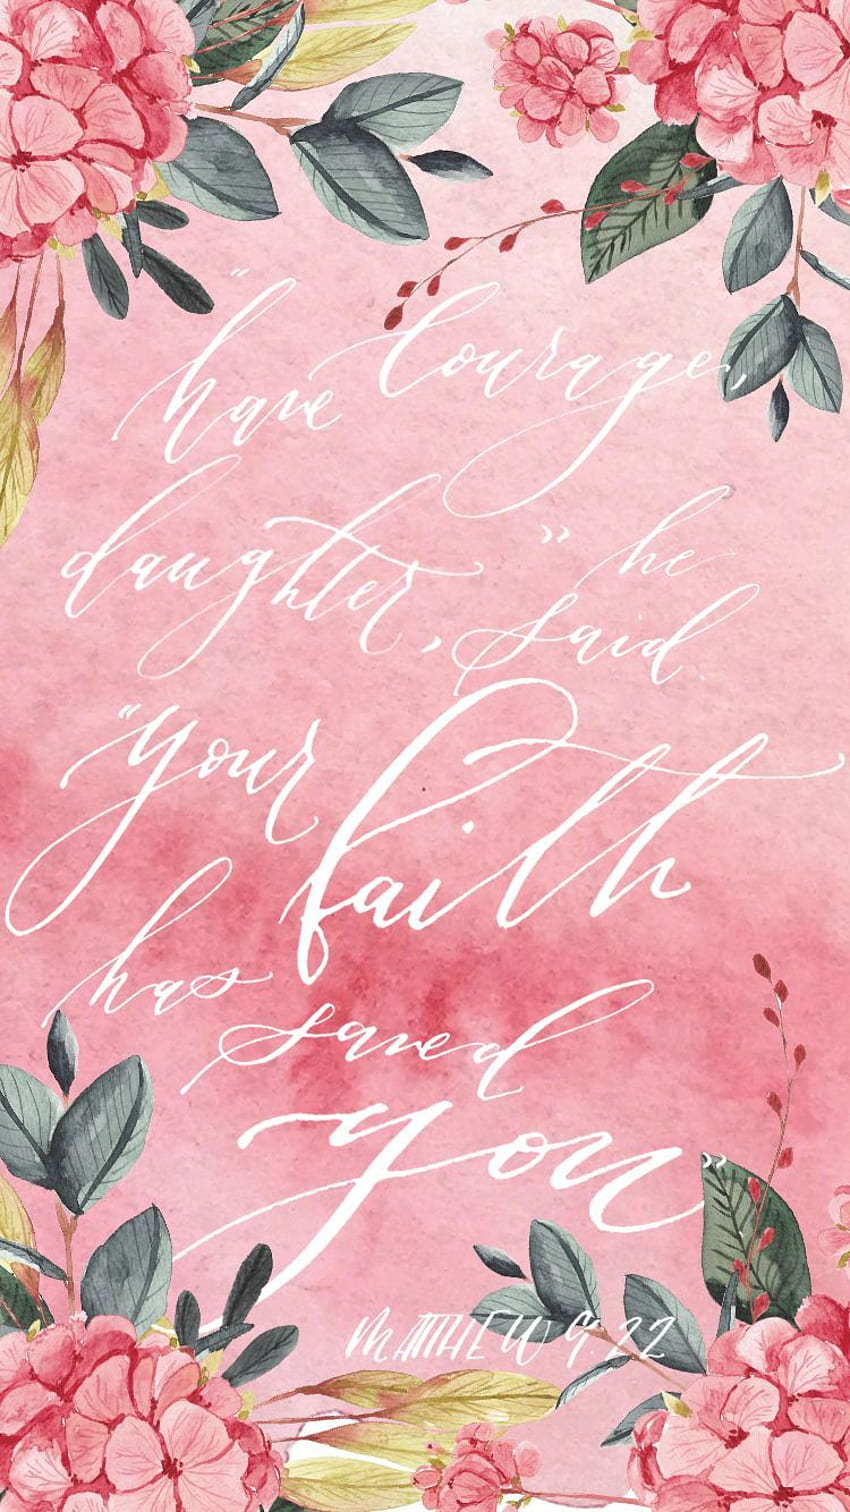 iPhone quote: Have courage daughter, he said. Your faith h. iPhone quotes love, iPhone quotes bible, iphone quotes HD phone wallpaper